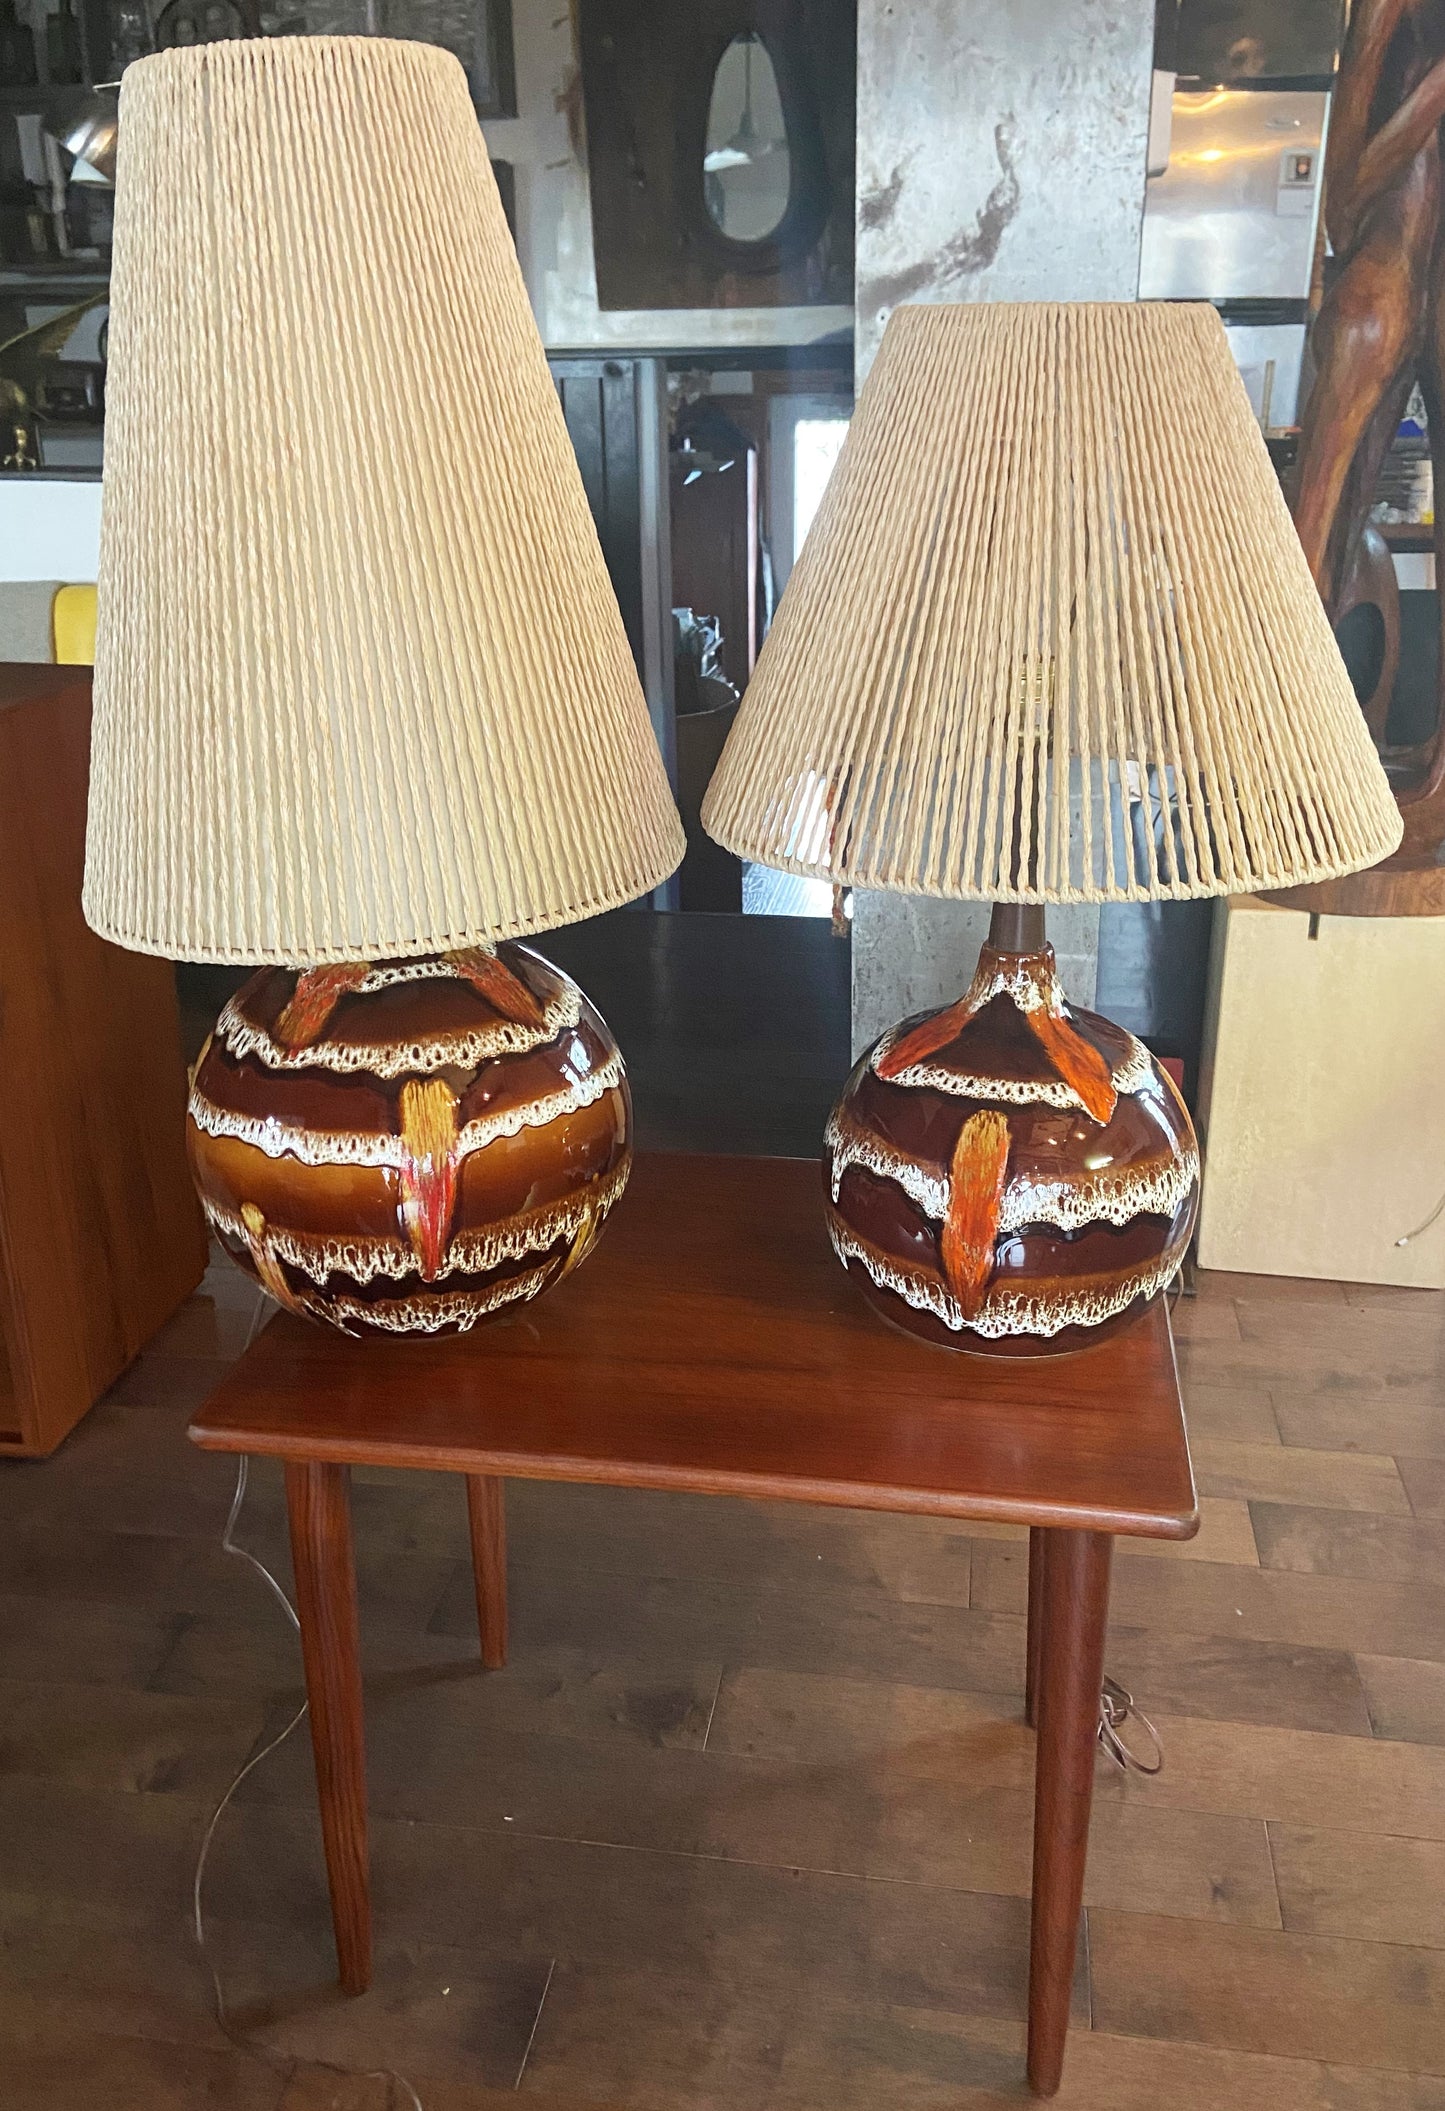 Set of 2 Mid Century Modern table lamps by Maurice Chalvignac